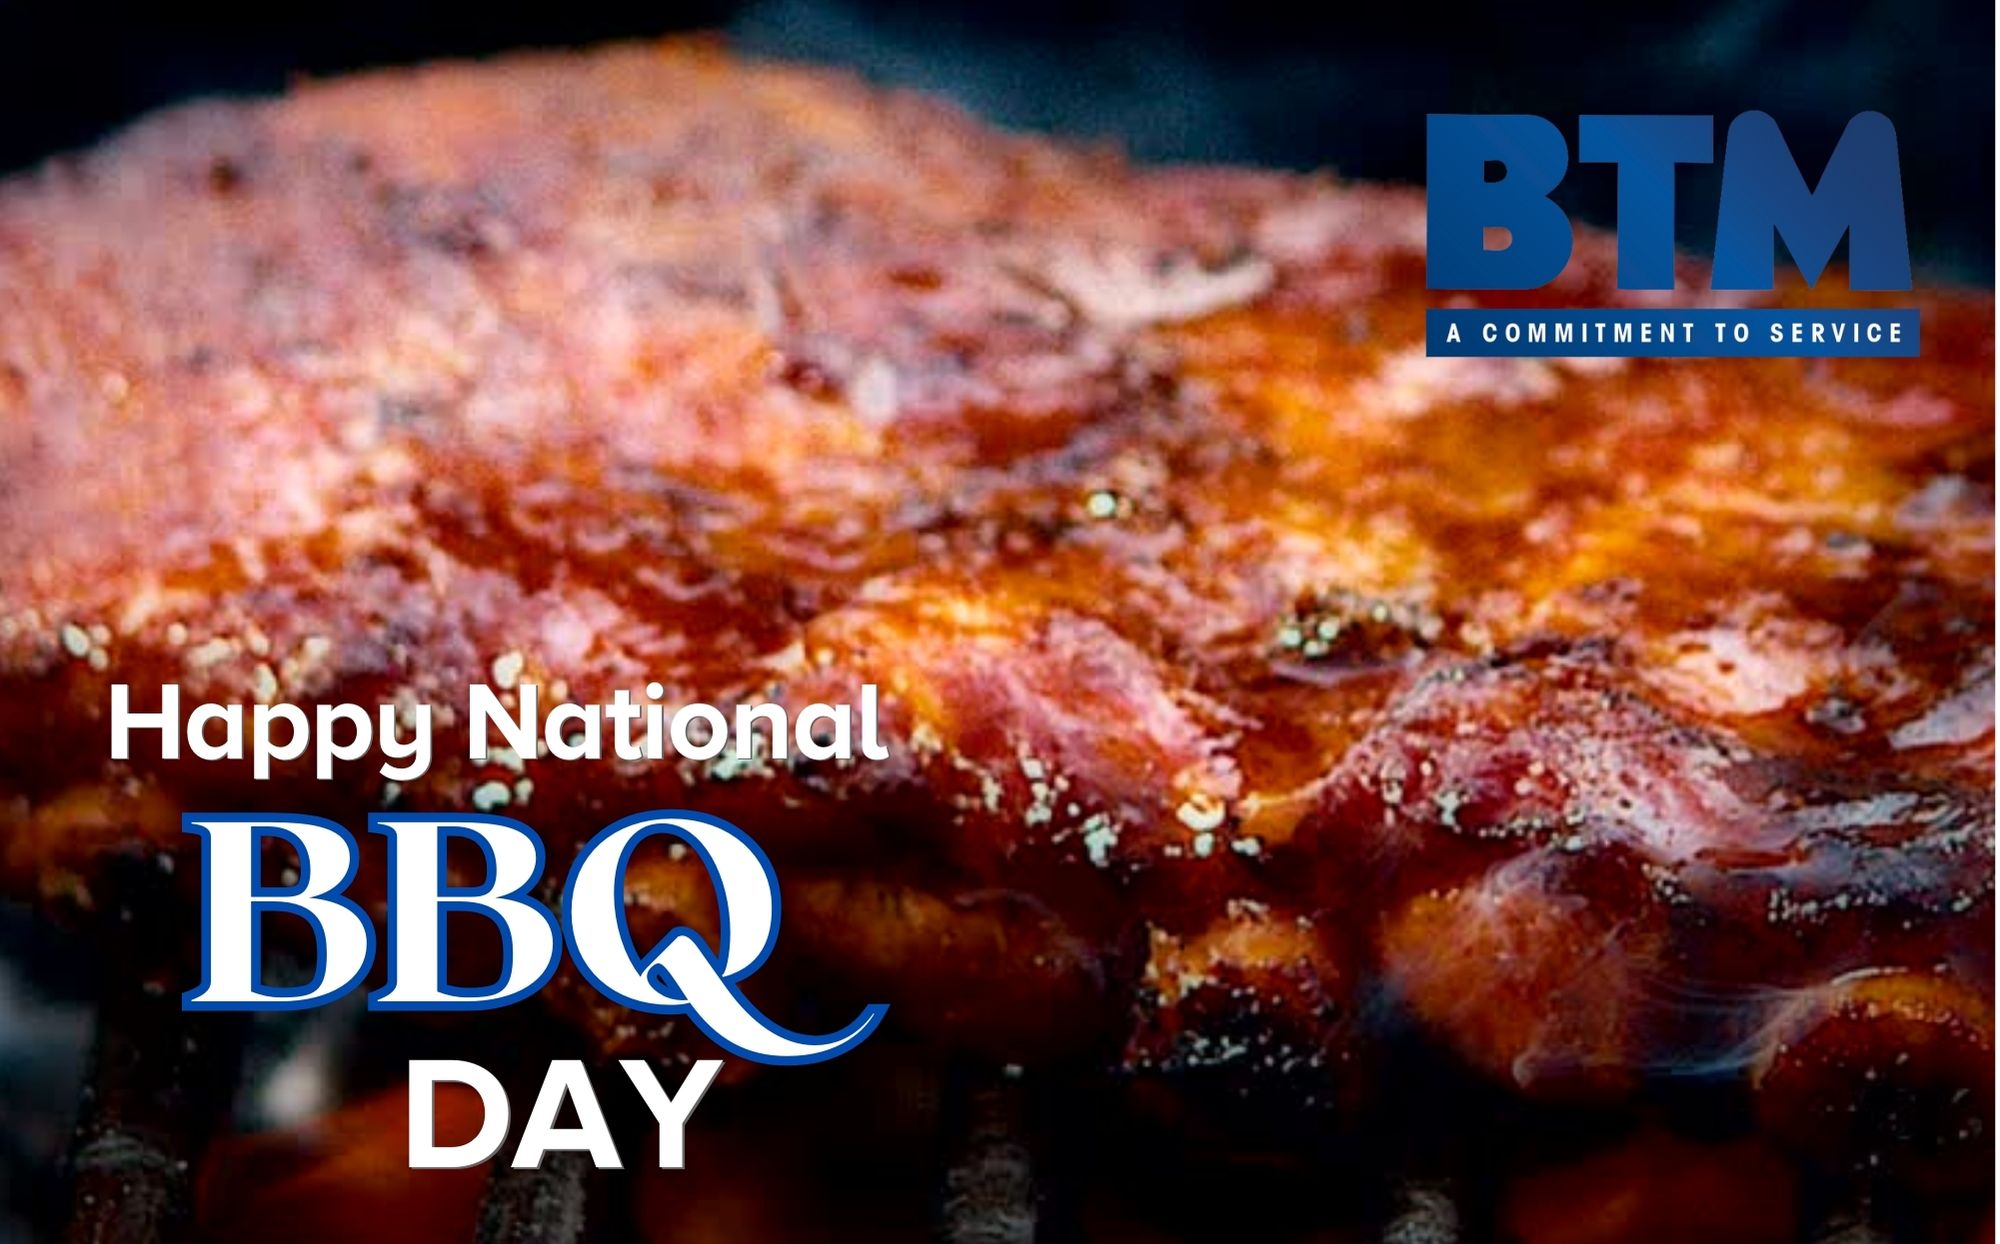 Today is National BBQ Day